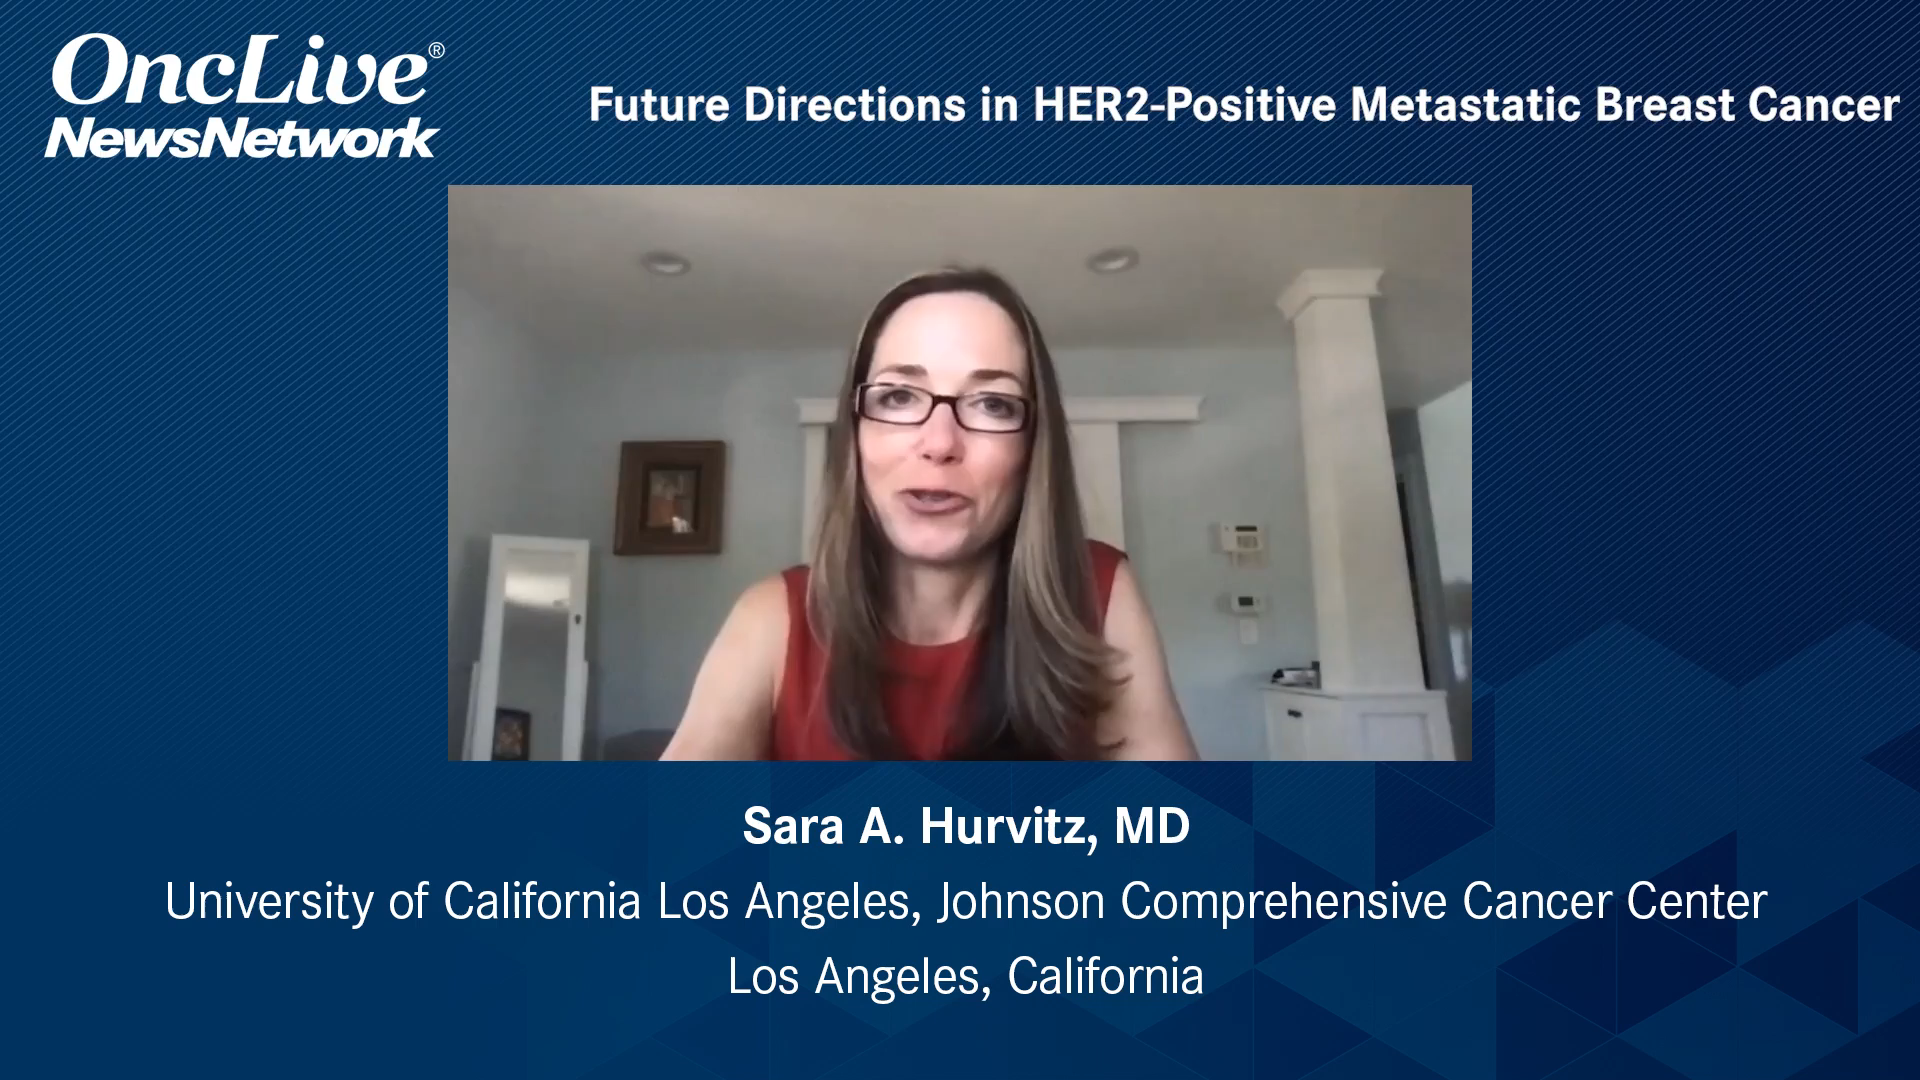 Future Directions in HER2-Positive Metastatic Breast Cancer